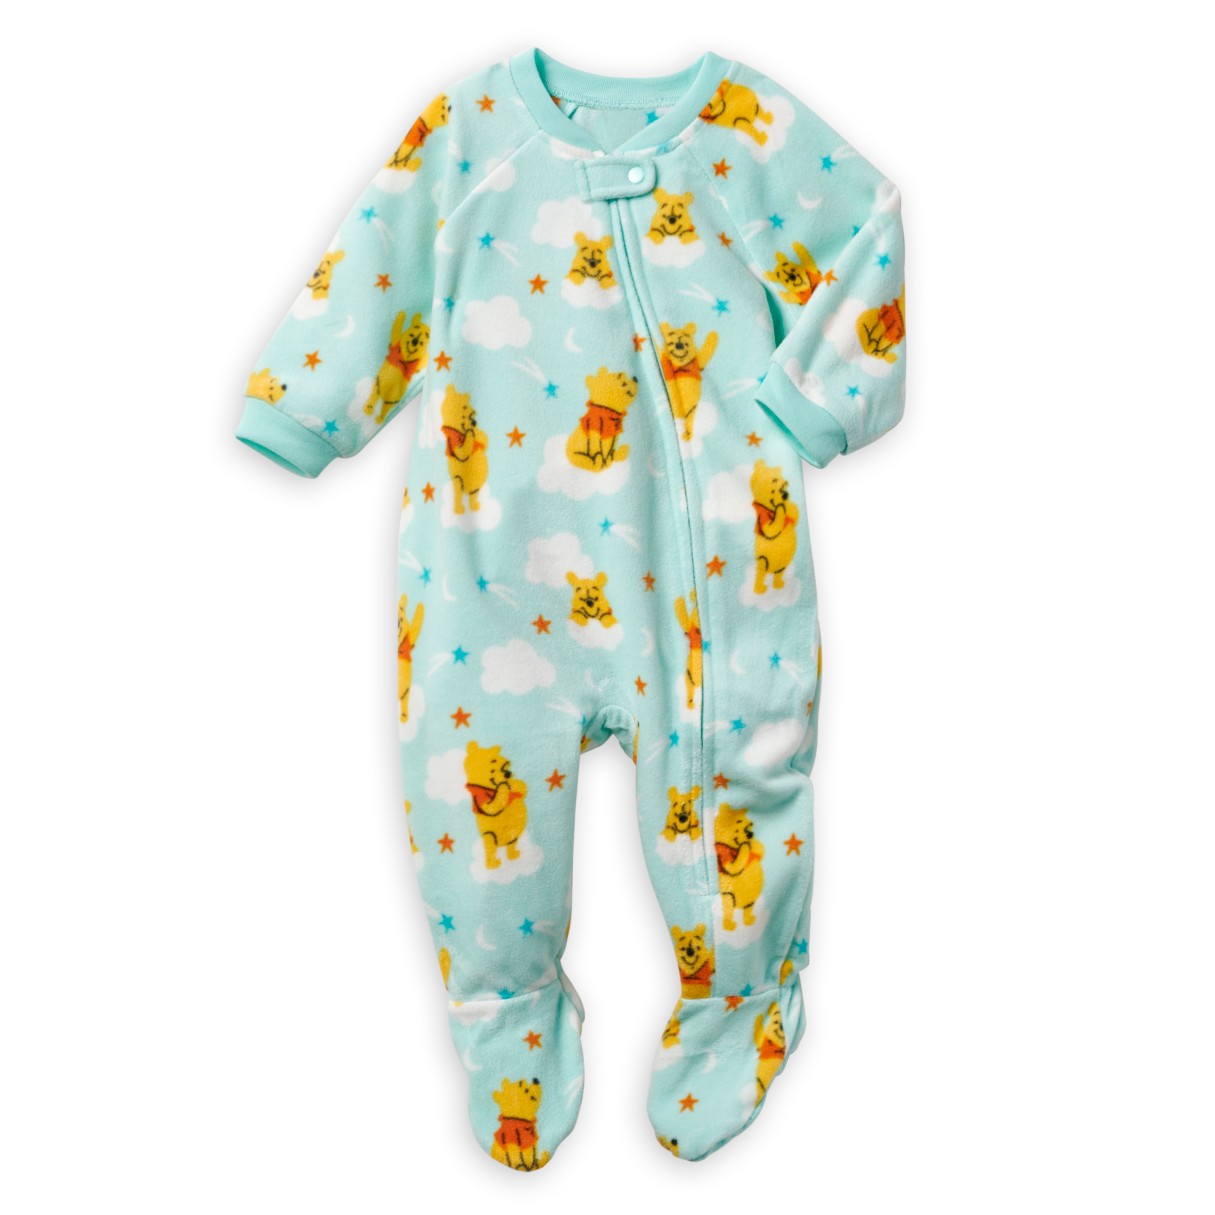 Winnie the Pooh Stretchie Sleeper for Baby